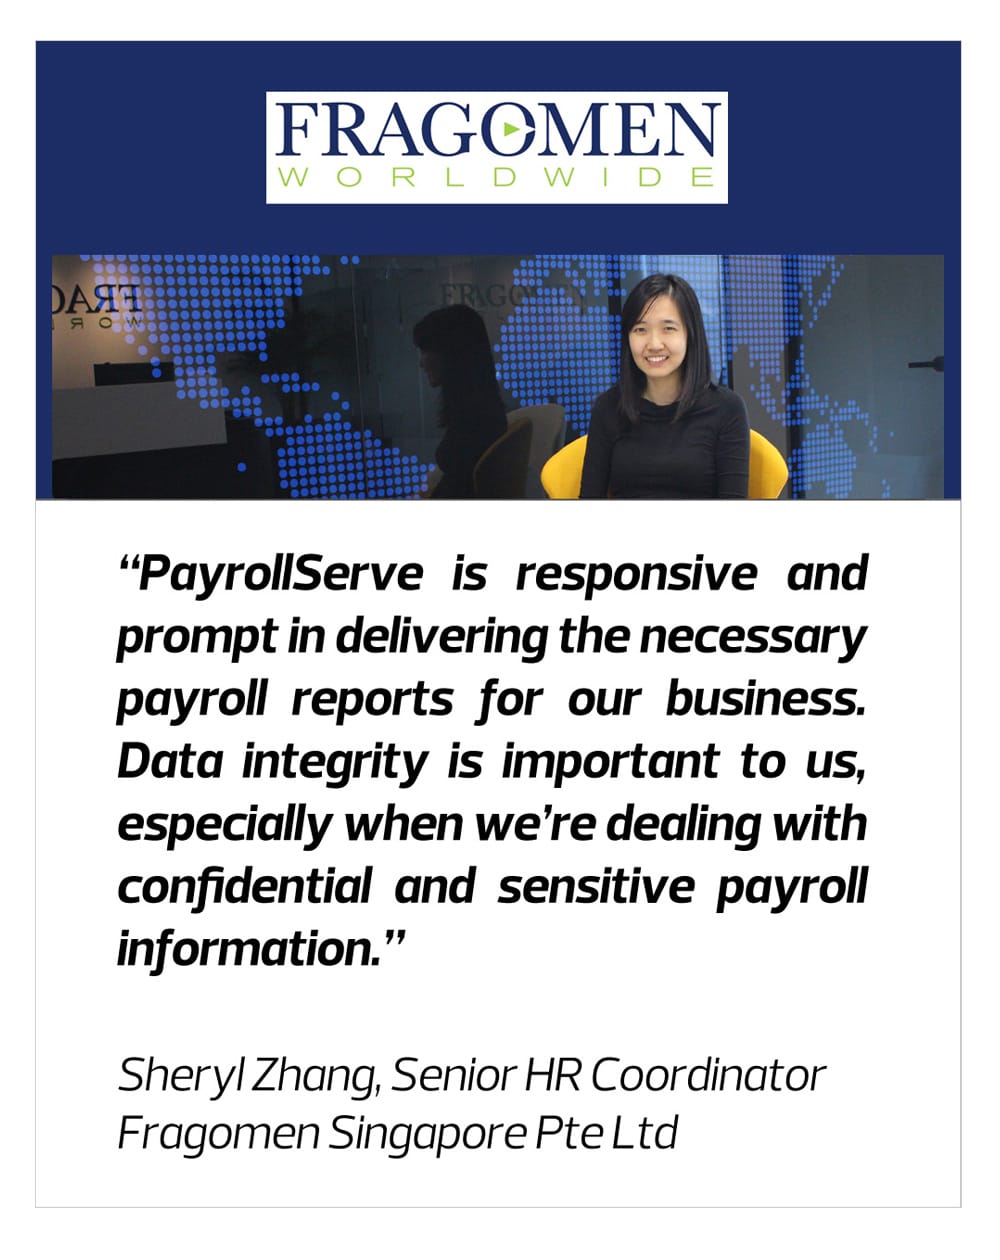 PayrollServe is responsive and prompt in delivering the necessary payroll reports for our business.- Fragomen Singapore